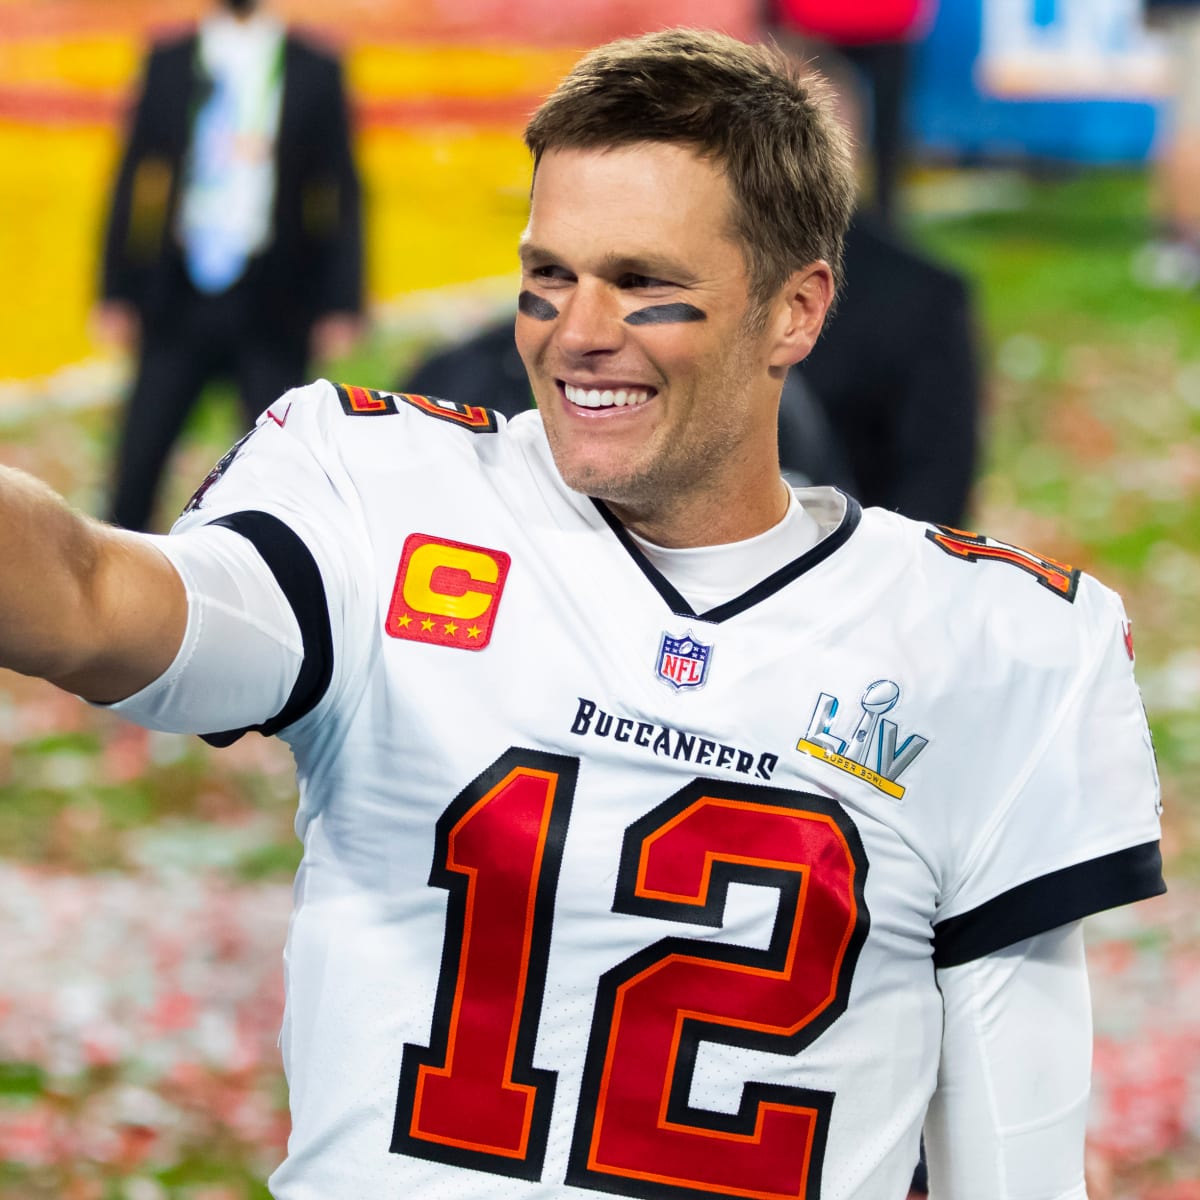 How many Super Bowls did Tom Brady win during his career? - Sports